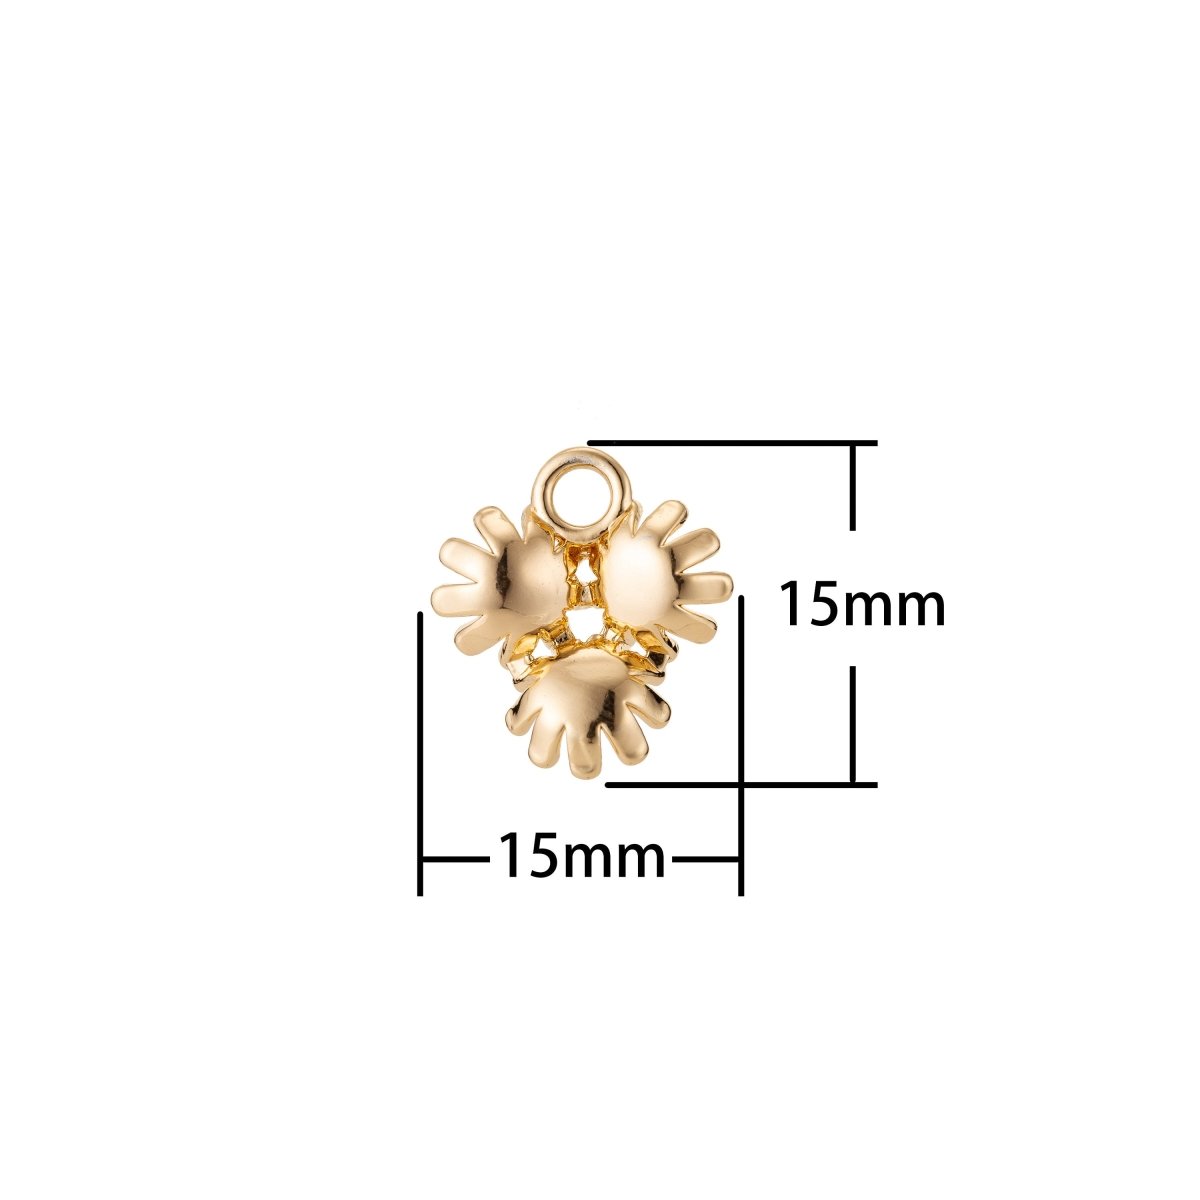 Dainty 18k Gold Filled Flower Charm Tiny Floral Charm Bracelet Necklace Earring Making - DLUXCA